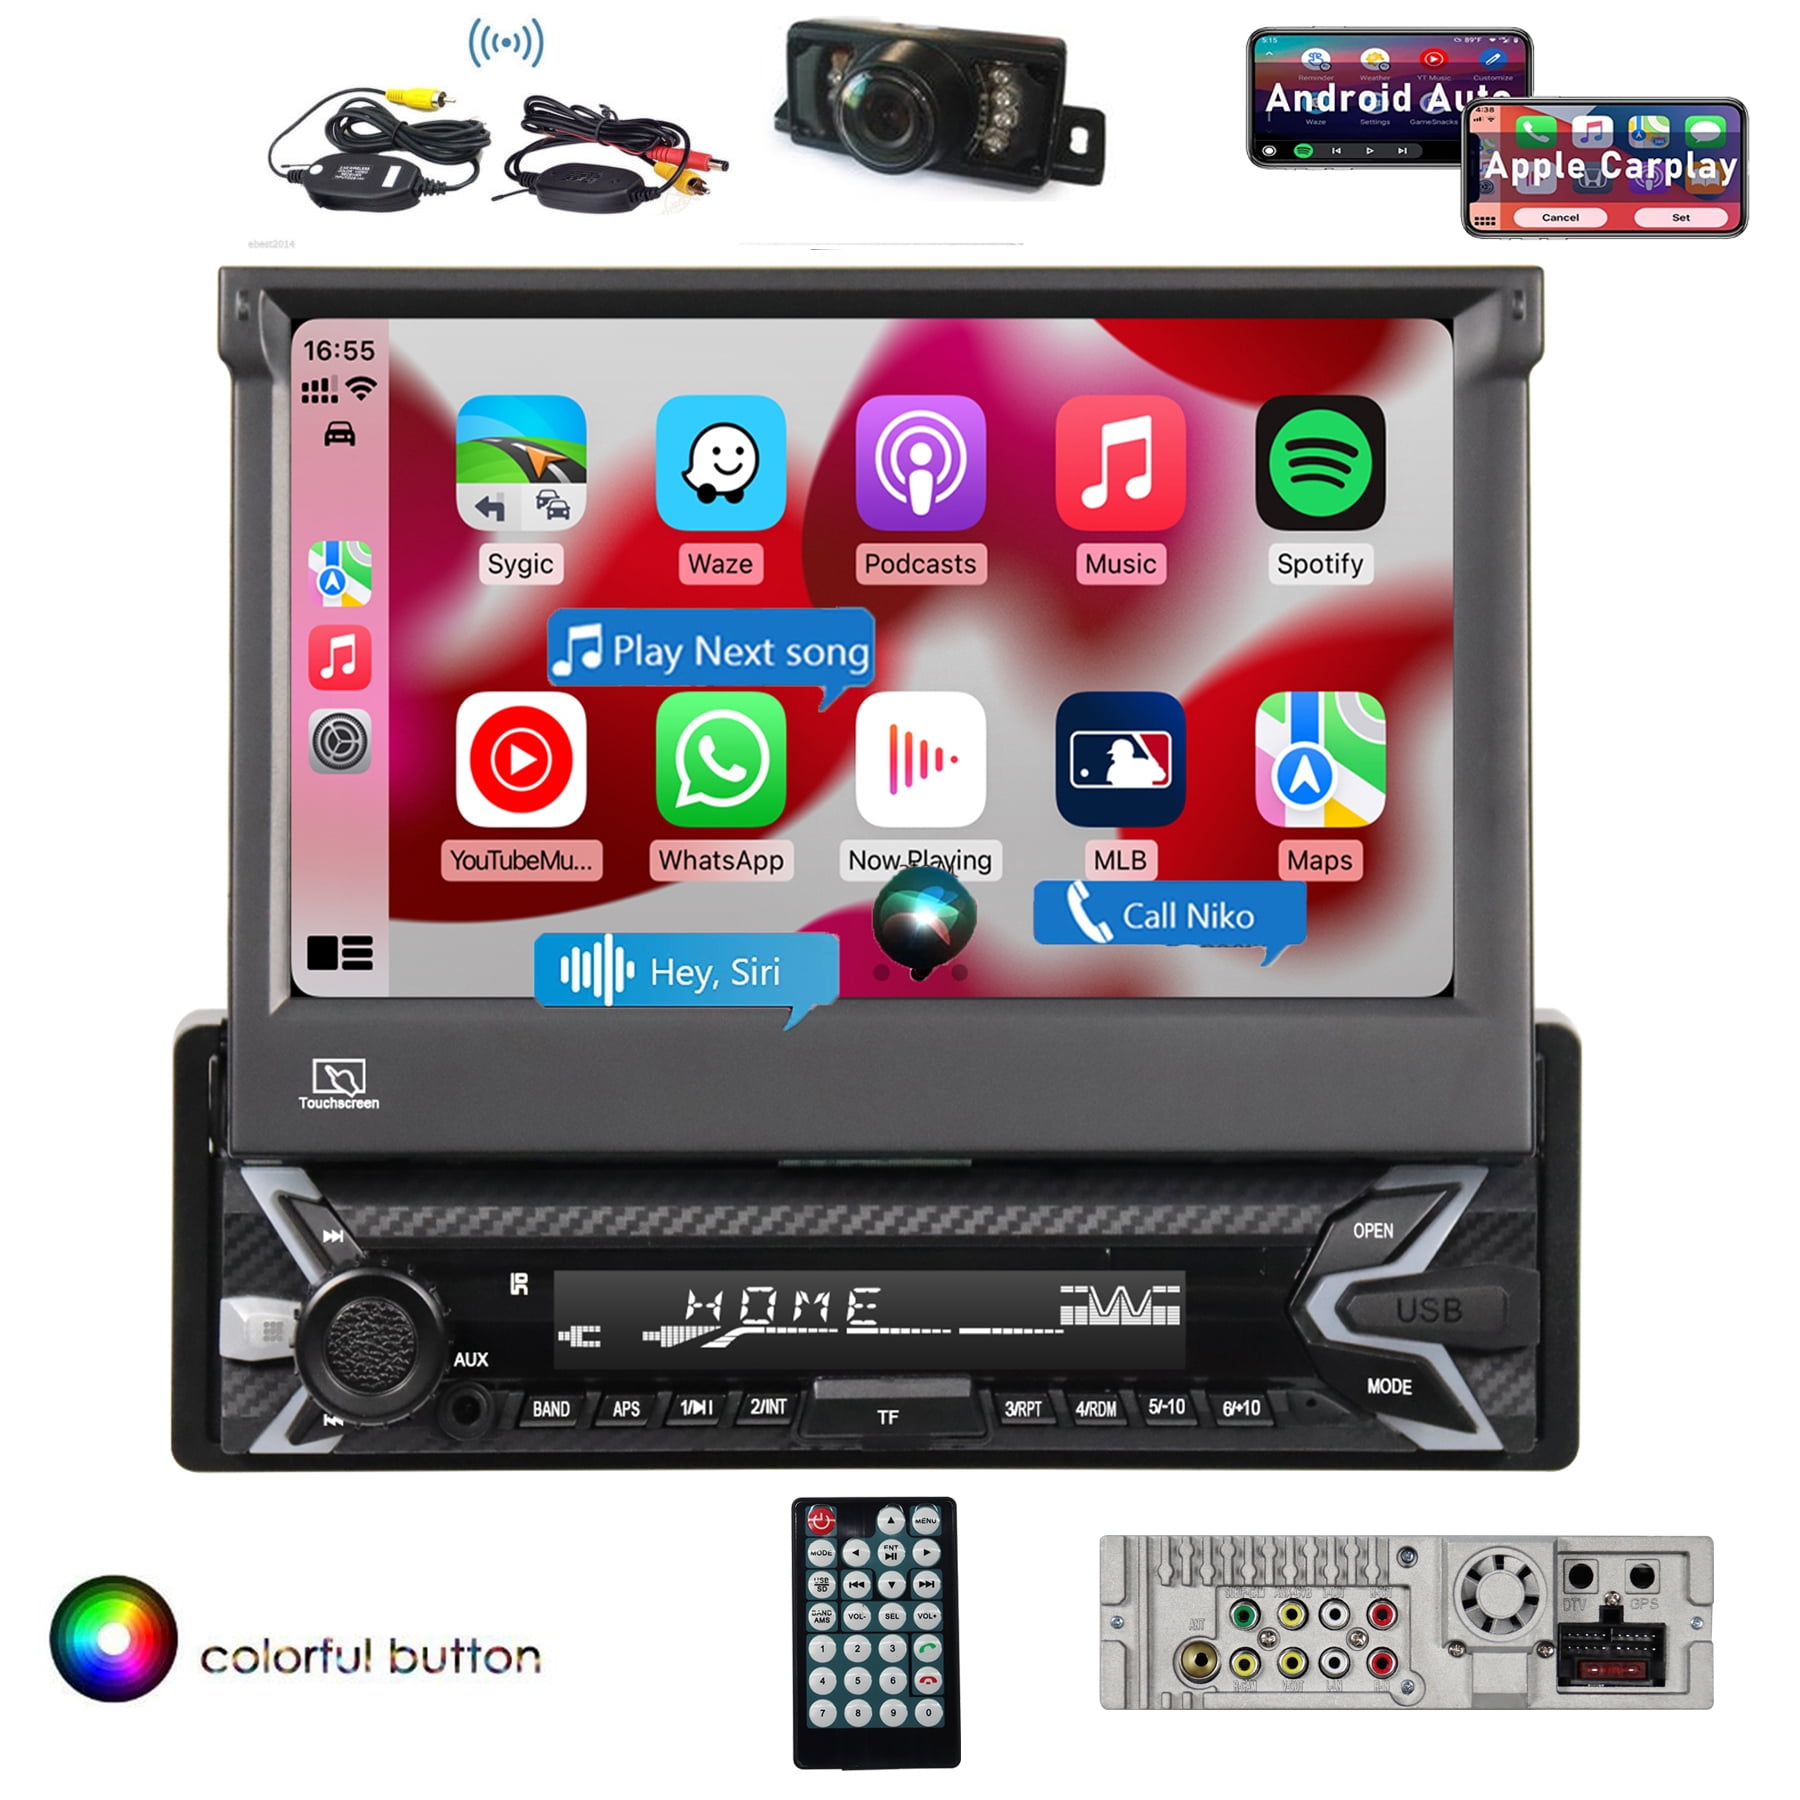 utilizar diente infinito Single DIN In Dash Car Stereo with Apple Carplay Android Auto Head Unit 7  inch Flip Out Capacitive Touch Screen Audio Video ,Radio,Bluetooth,  Built-in Microphone,USB SD + Wireless Camera - Walmart.com